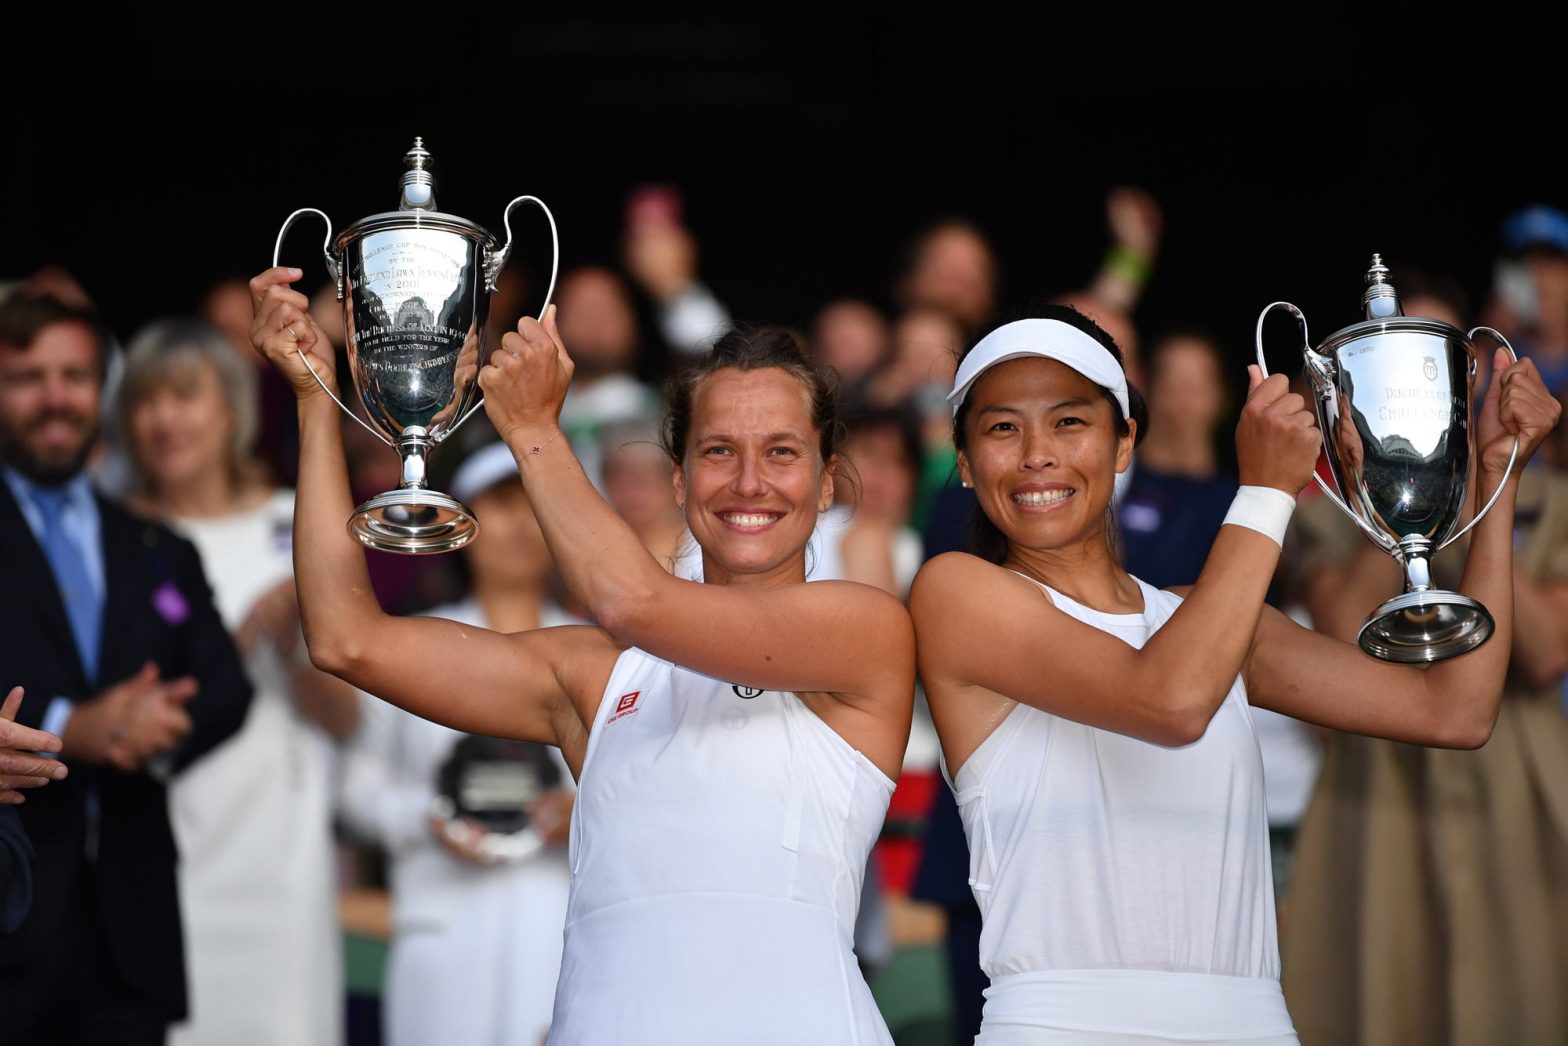 Who are Hsieh Su-wei and Barbora Strycova?